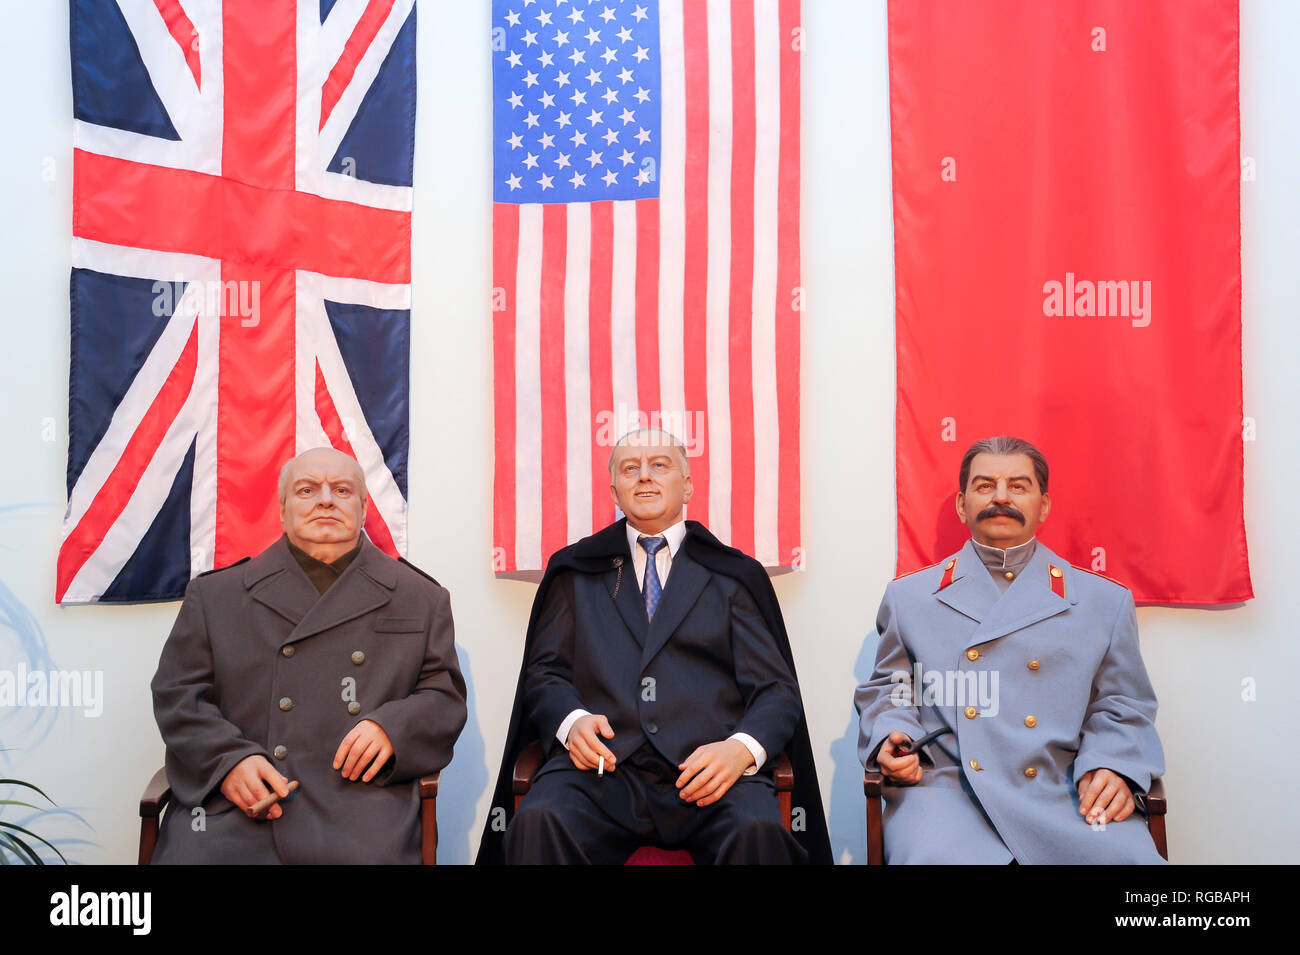 Wax figures of The Big Three: Winston Churchill, Franklin D. Roosevelt and Joseph Stalin during Yalta Conference in 4 to 11 February 1945 in Neo Renai Stock Photo